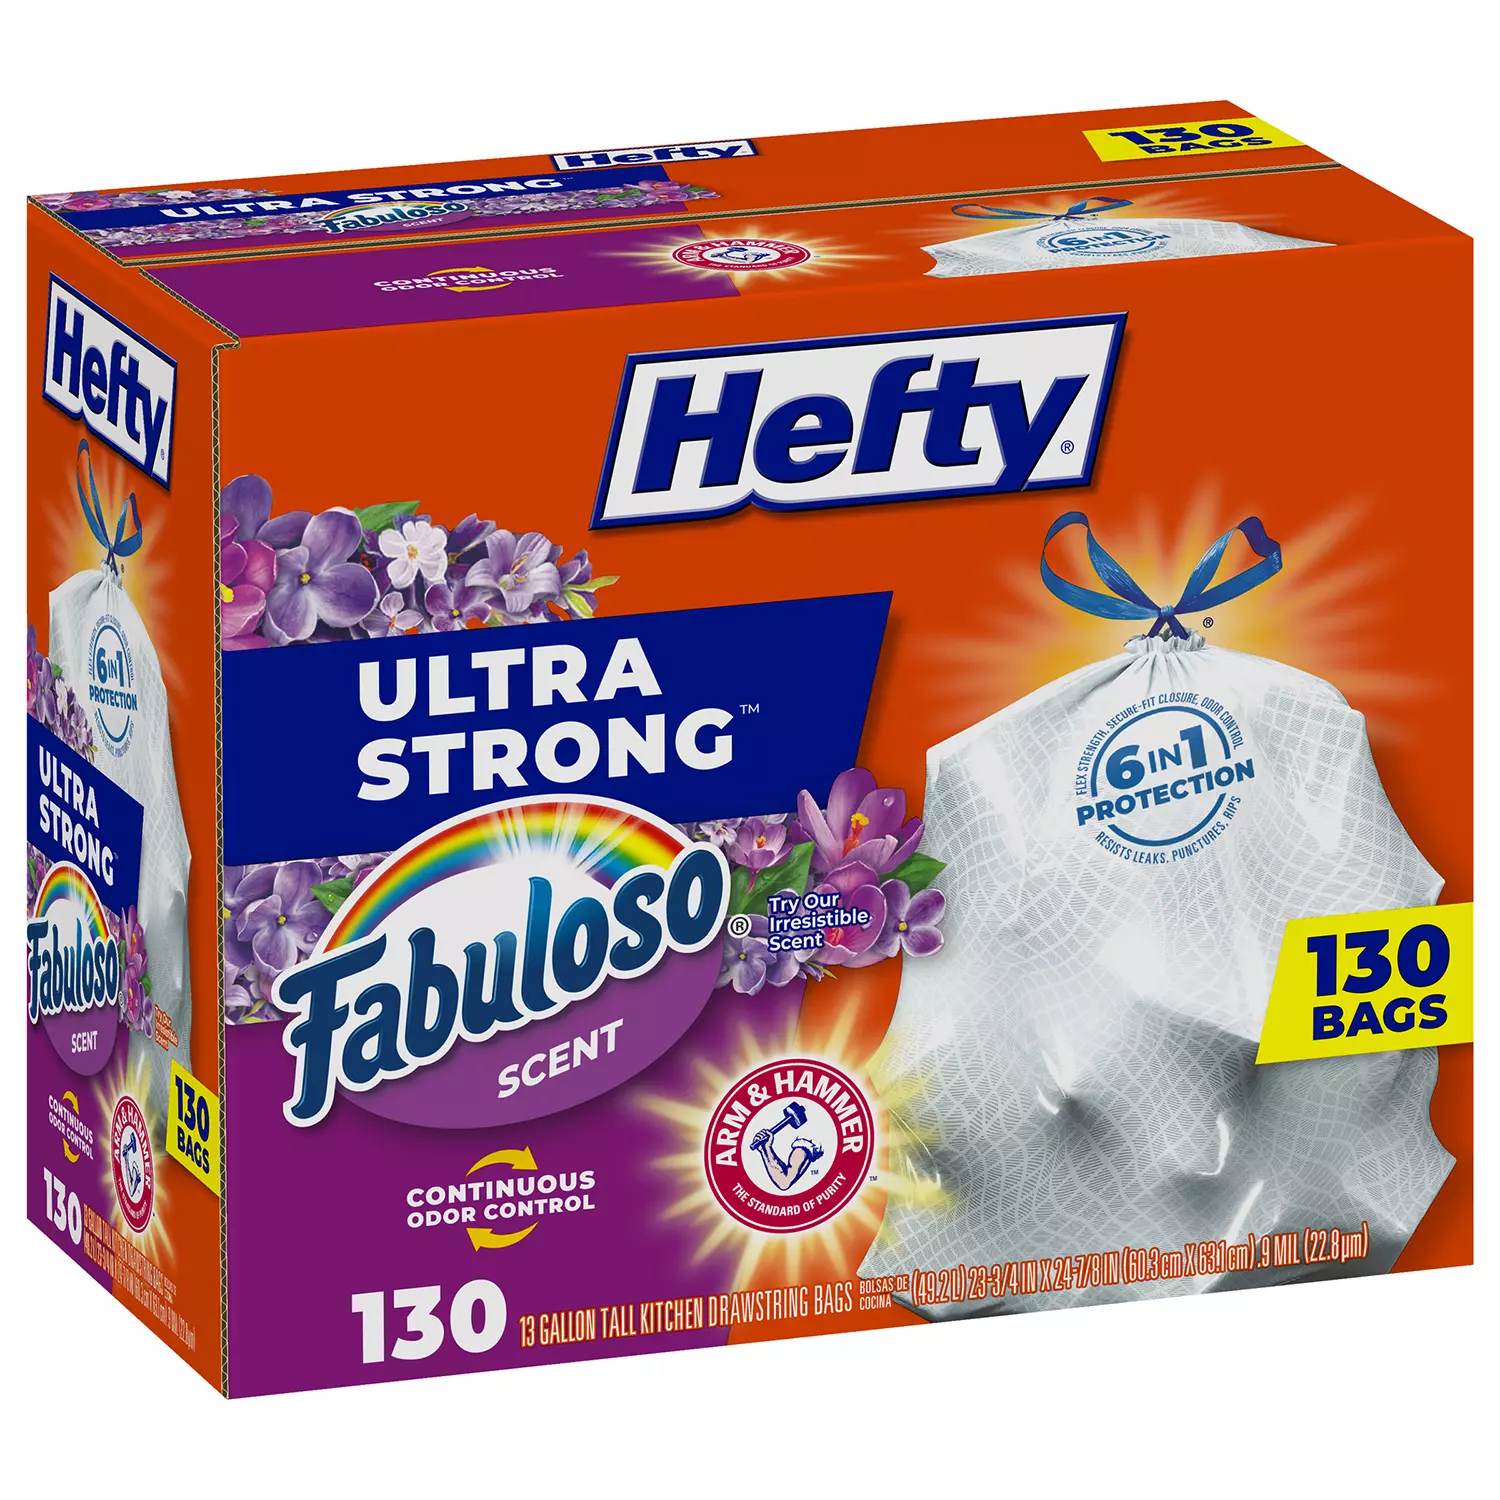 Hefty Ultra Strong 13-Gallon Kitchen Drawstring Trash Bags, Fabuloso Scent (130 ct.)